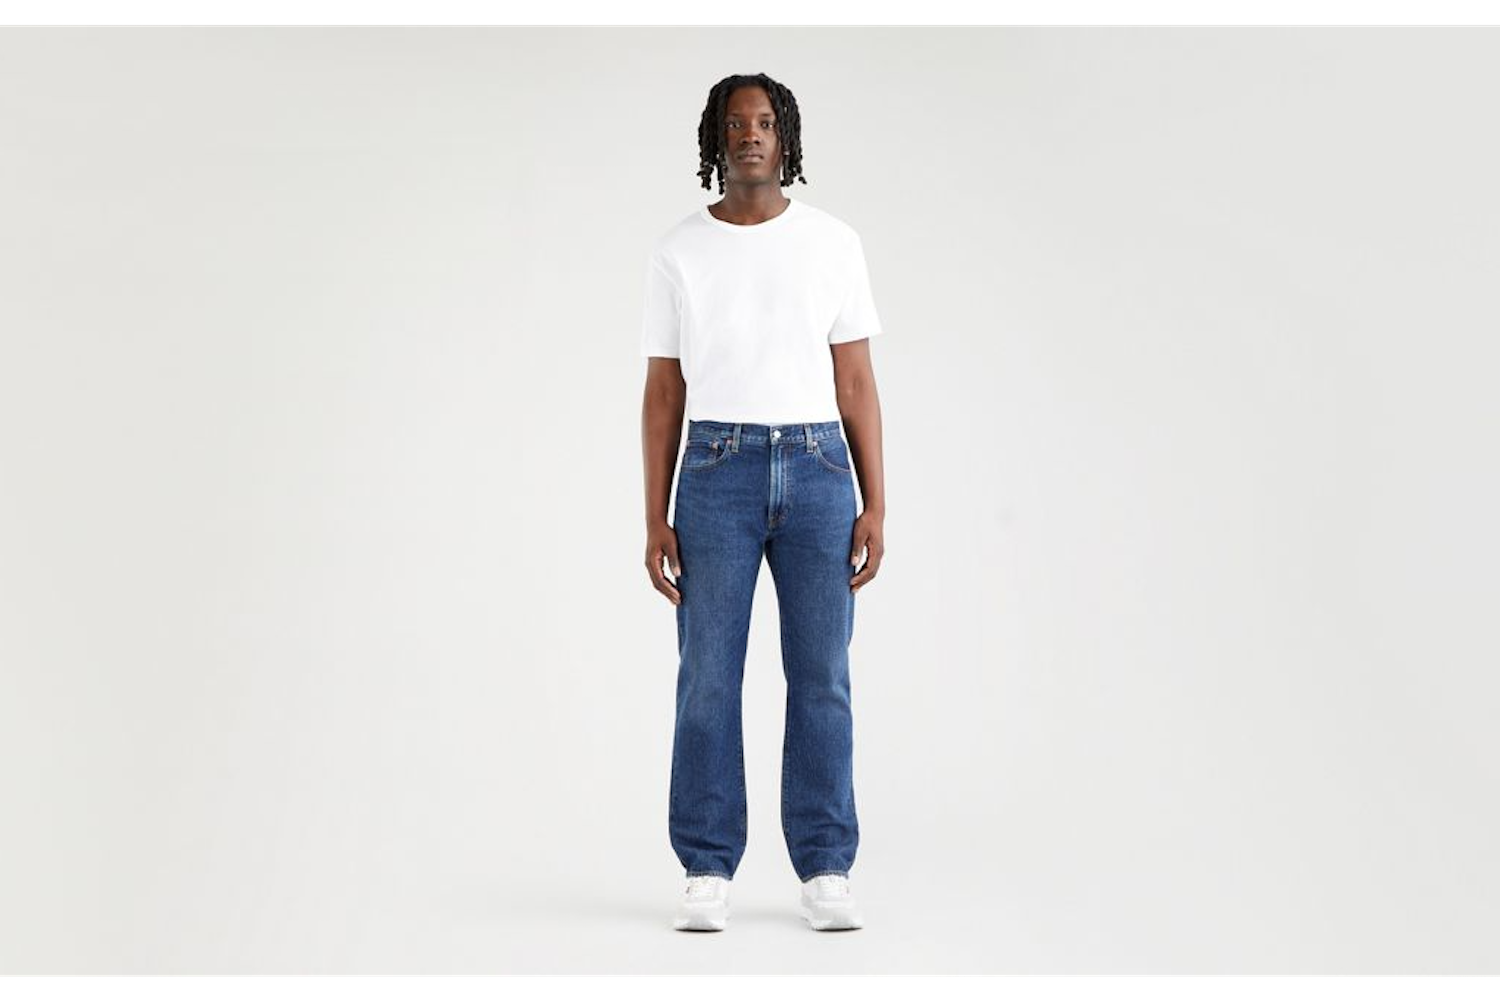 Levi's Jeans Style Number Explained From 501 to 569 - InsideHook